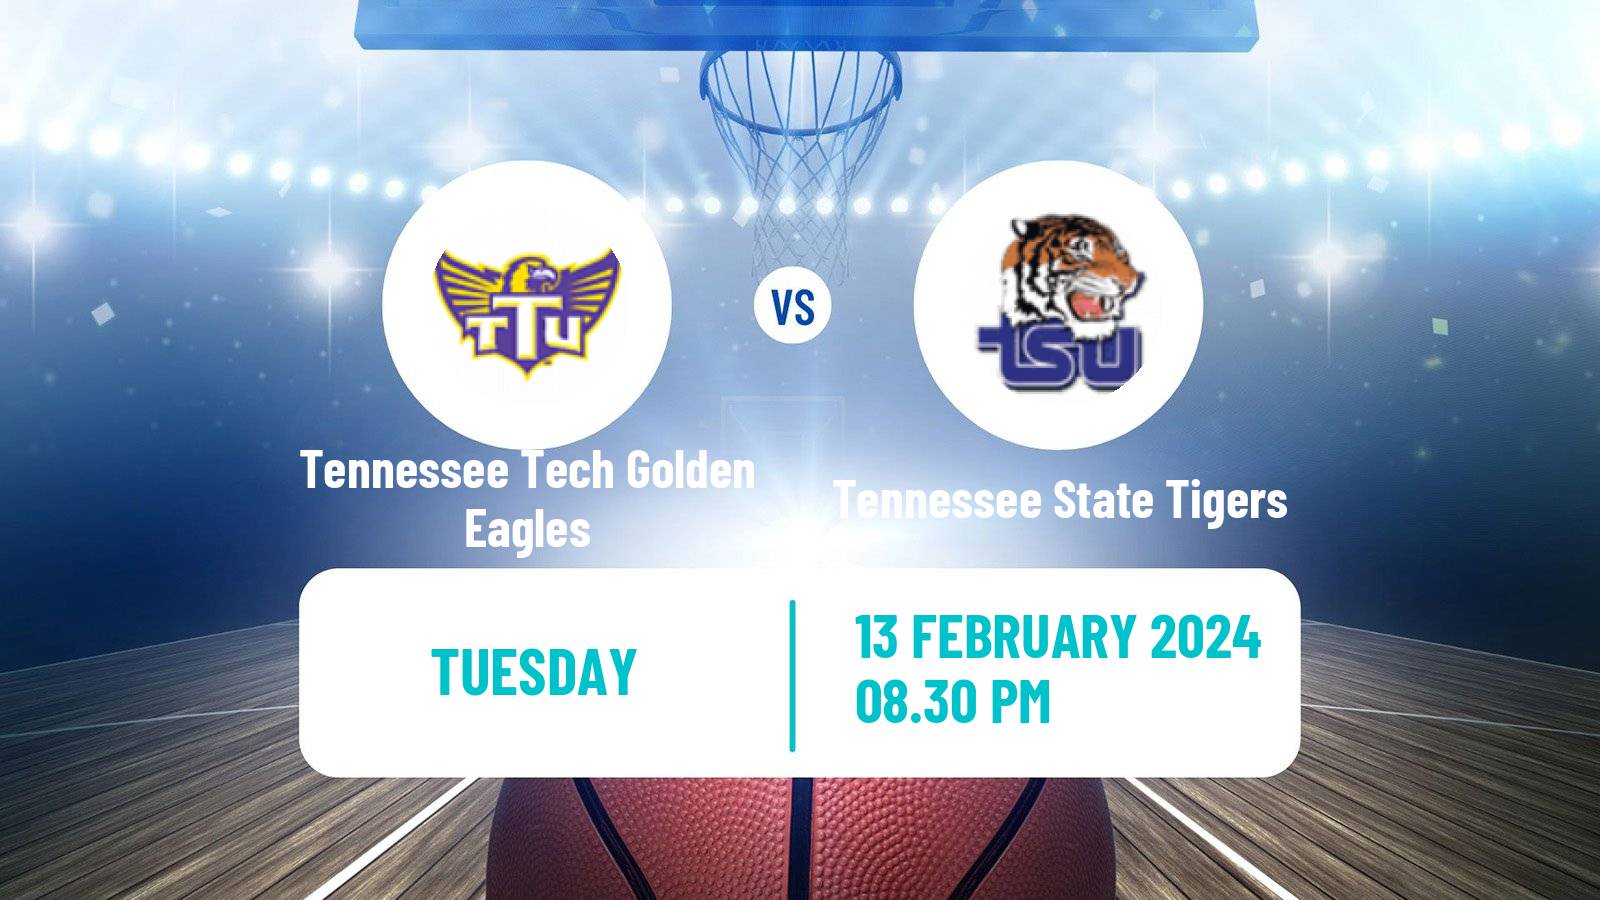 Basketball NCAA College Basketball Tennessee Tech Golden Eagles - Tennessee State Tigers